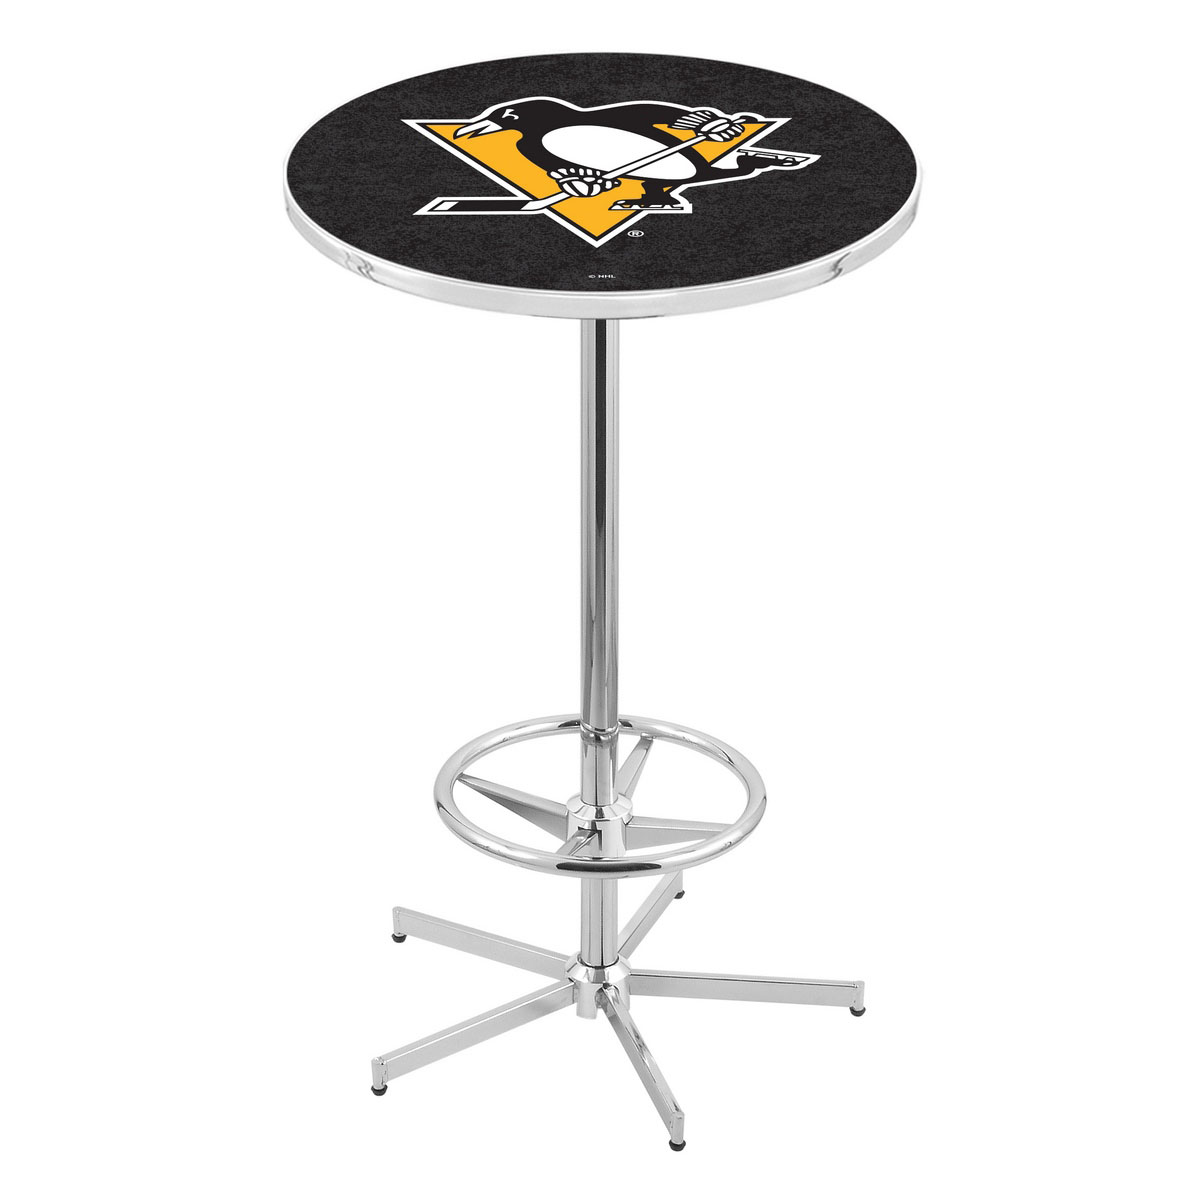 42 Inch Chrome Pittsburgh Penguins Pub Table